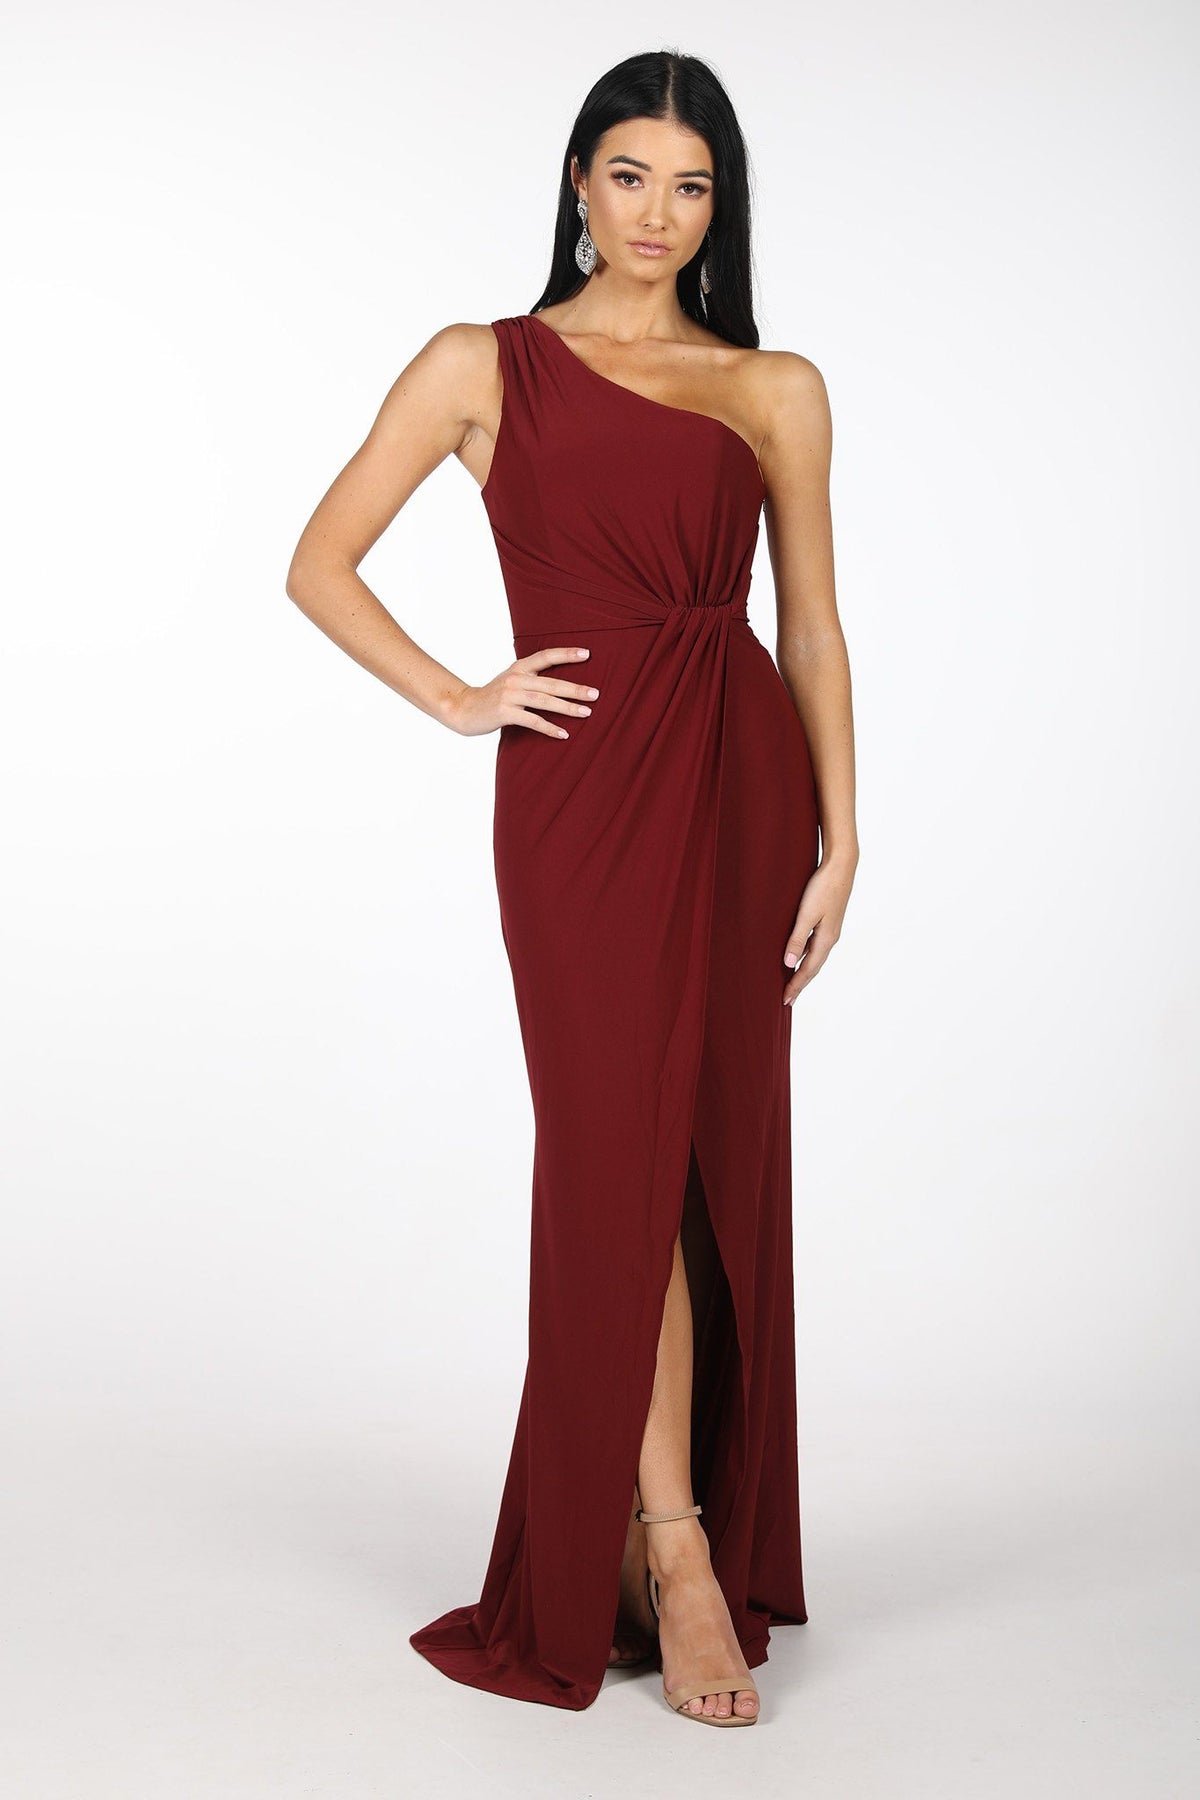 Maxi-Length Dress with Asymmetrical One Shoulder Neckline, Ruched Waist, Above Knee High Slit, and a Column Styled Silhouette in Wine Colour